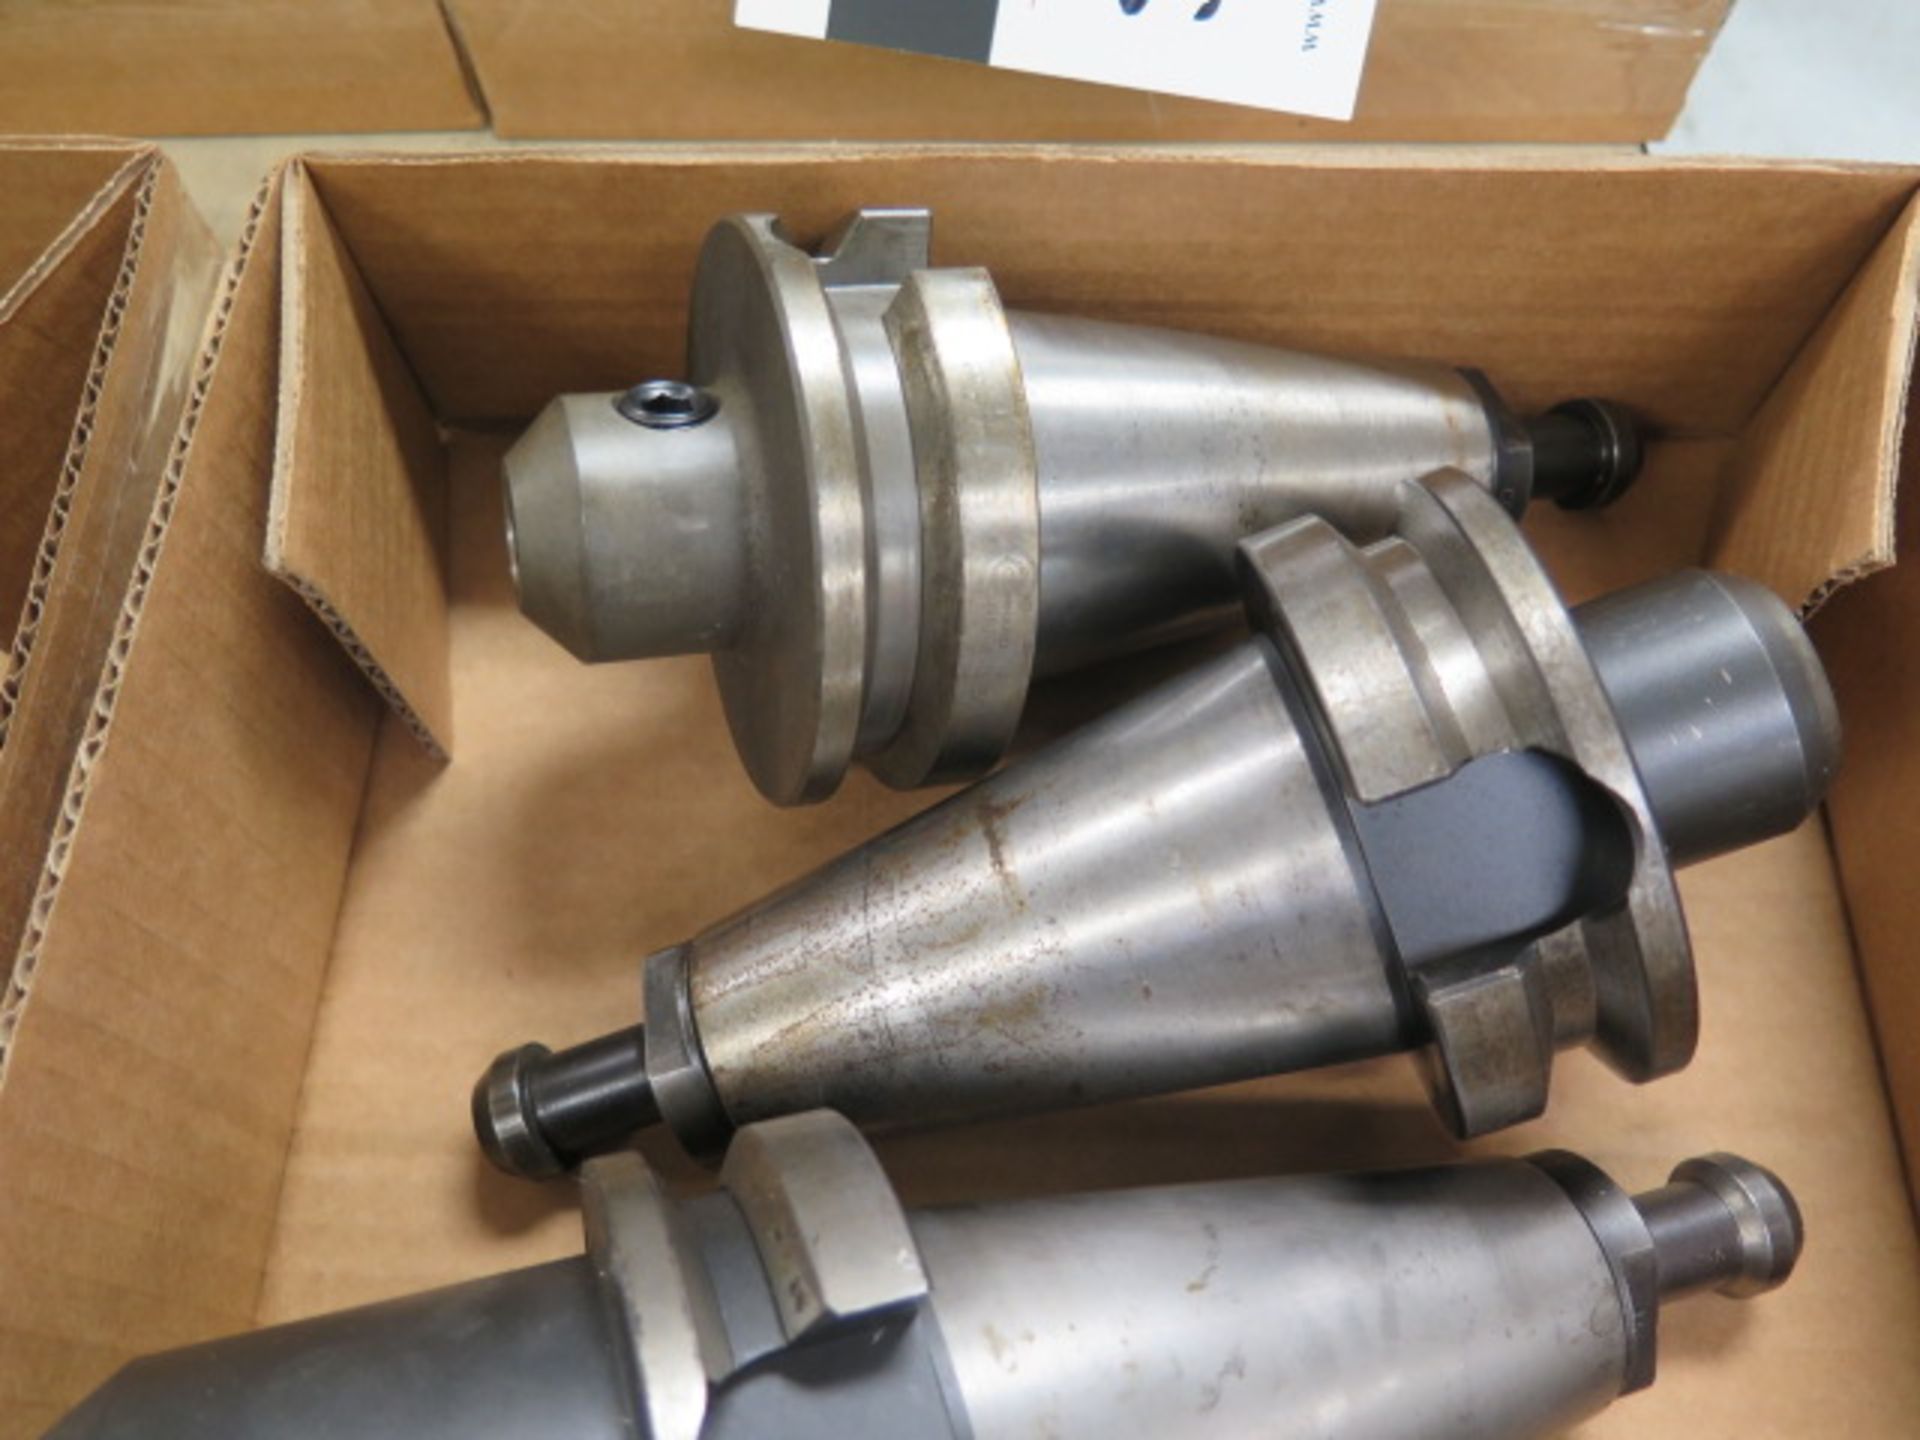 BT-50 Taper Tooling (5) (SOLD AS-IS - NO WARRANTY) (Located @ 2229 Ringwood Ave. San Jose) - Image 3 of 5